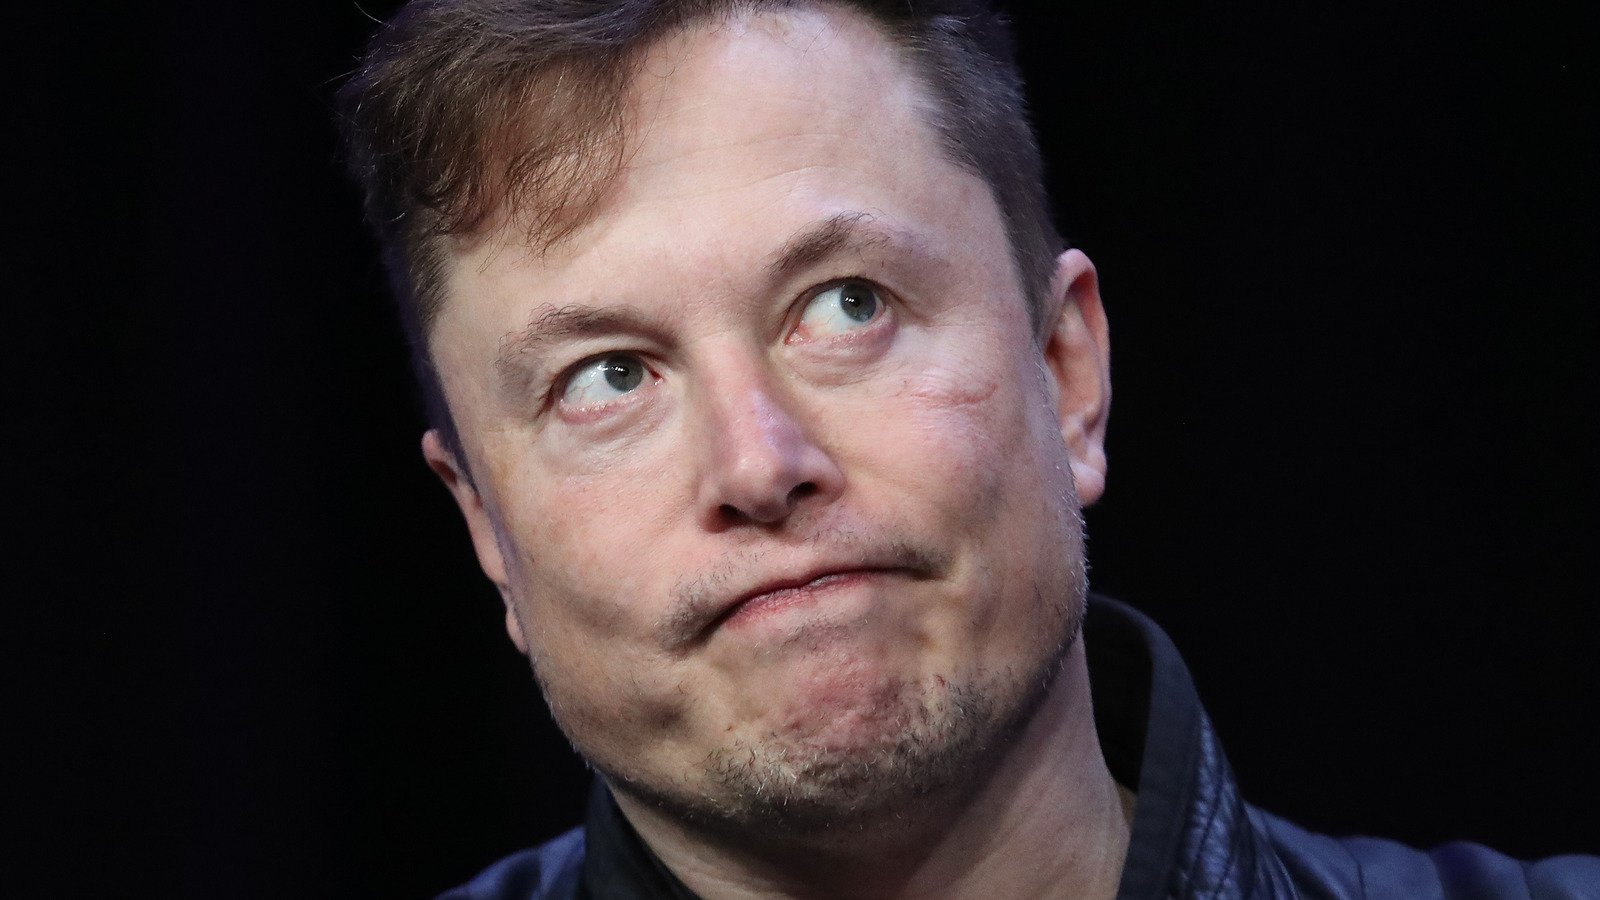 Elon Musk Gets Booed On Stage At Dave Chappelle's Comedy Show